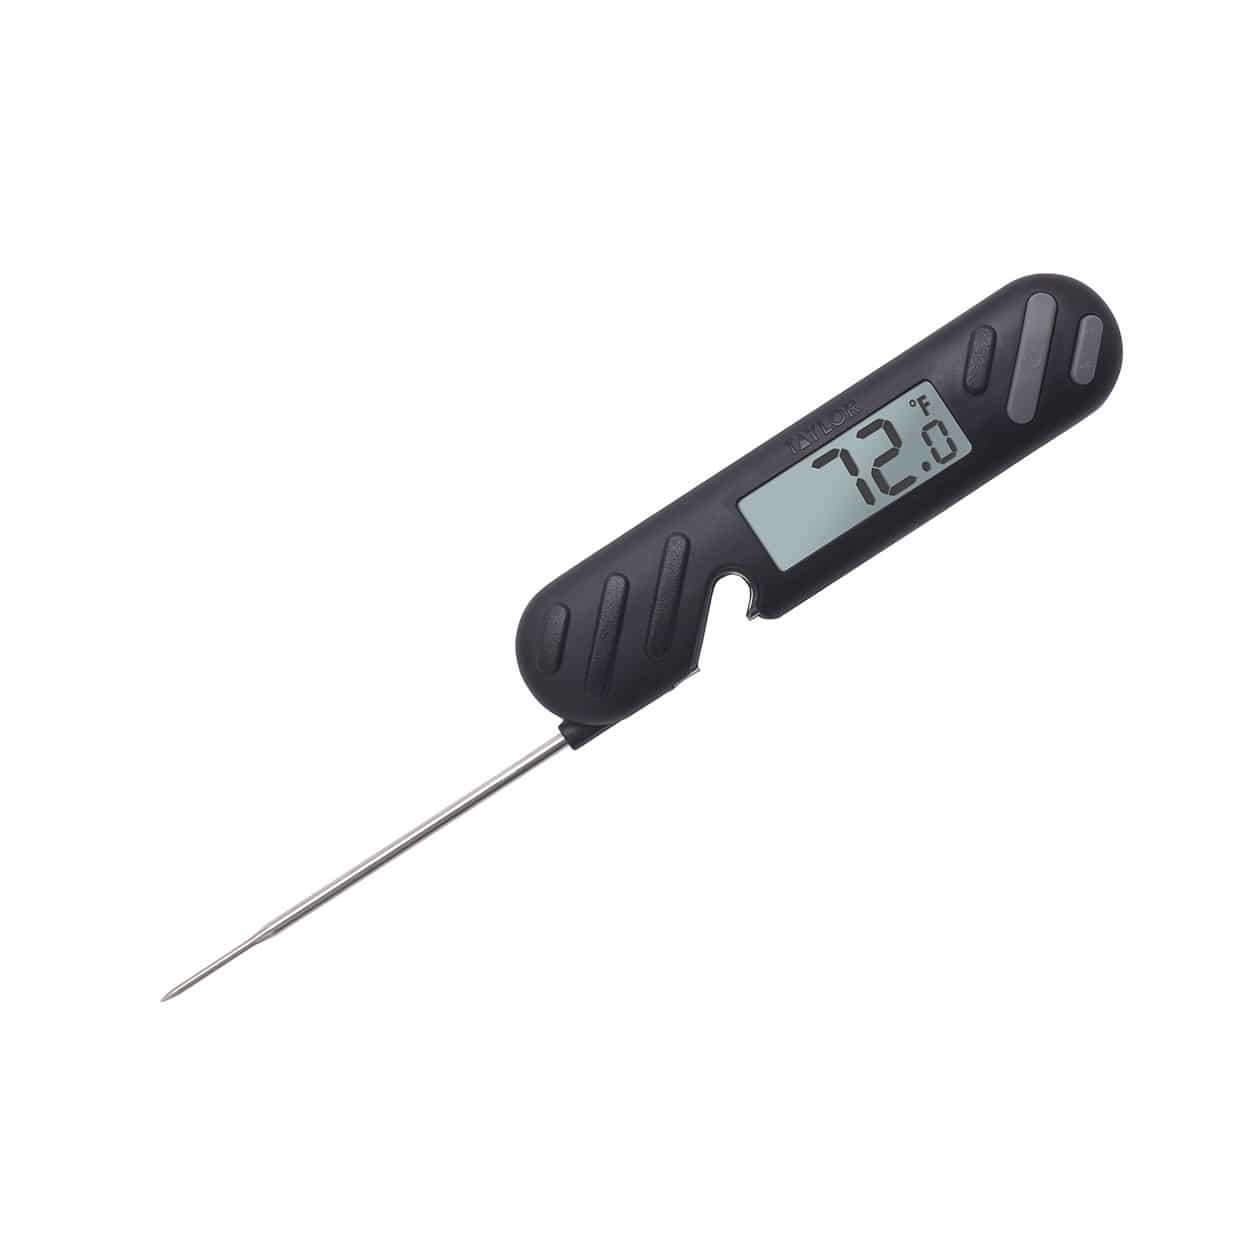 Taylor Digital Probe Meat Thermometer, Black, Compact Size for BBQs and  Tailgating, Foldable Probe for Easy Storage in the Meat Thermometers  department at